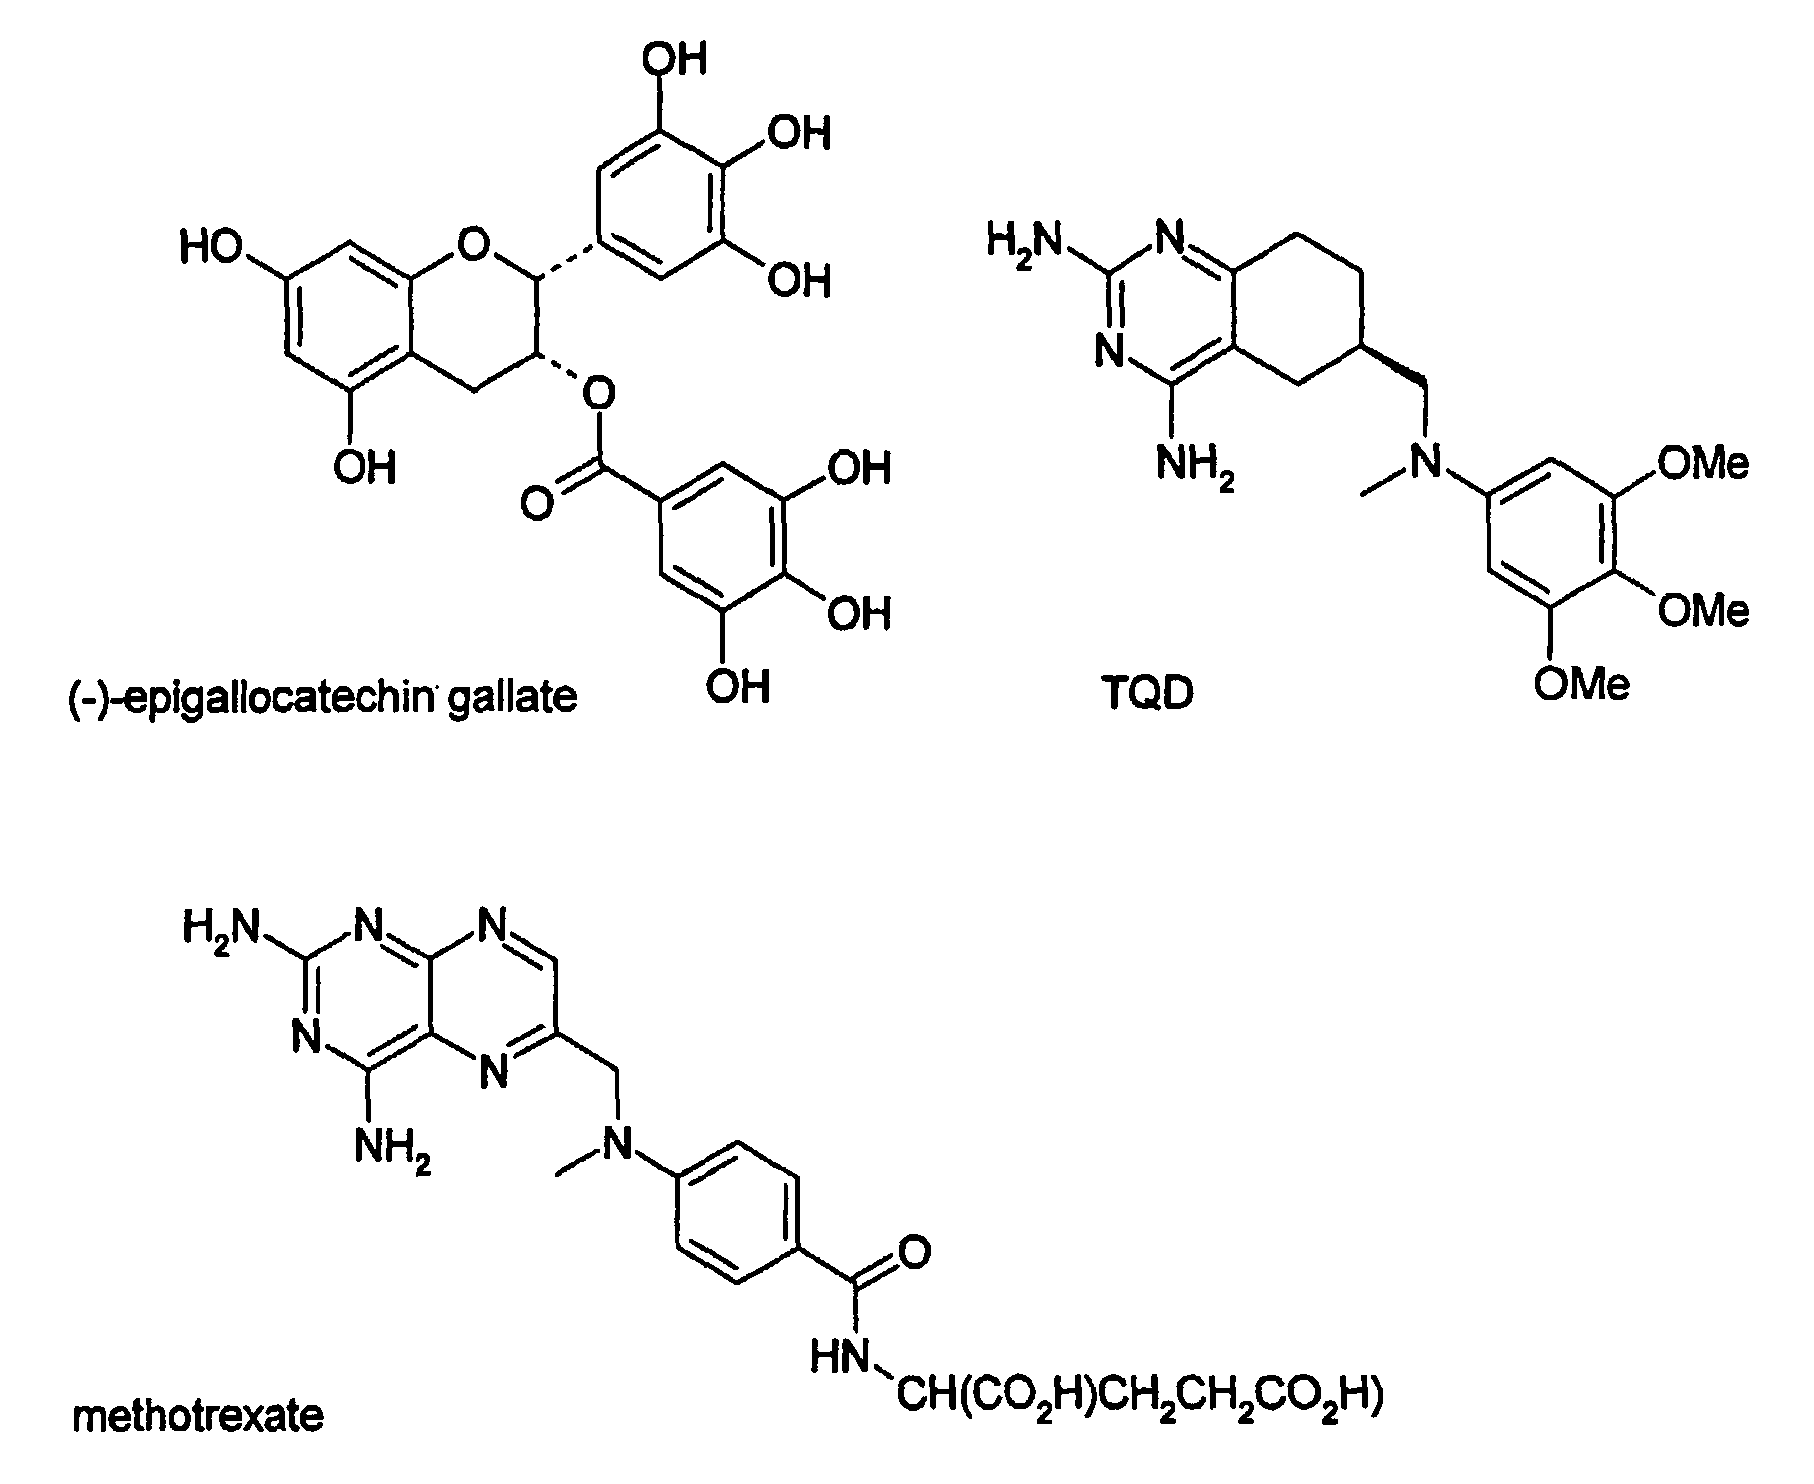 Dihydrofolate reductase inhibition by epigallocatechin gallate compounds